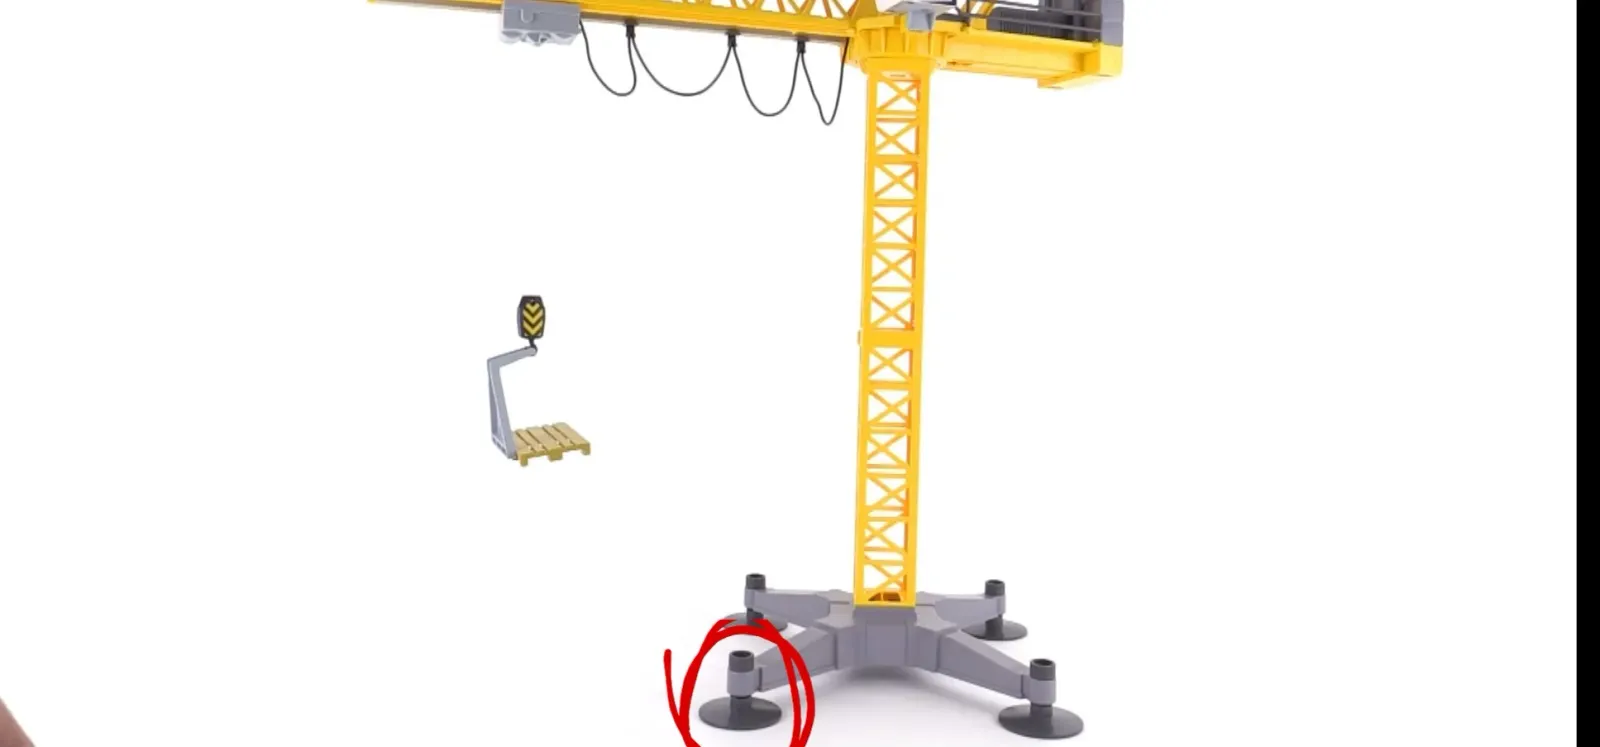 Contest: Playmobil Crane foot replacement